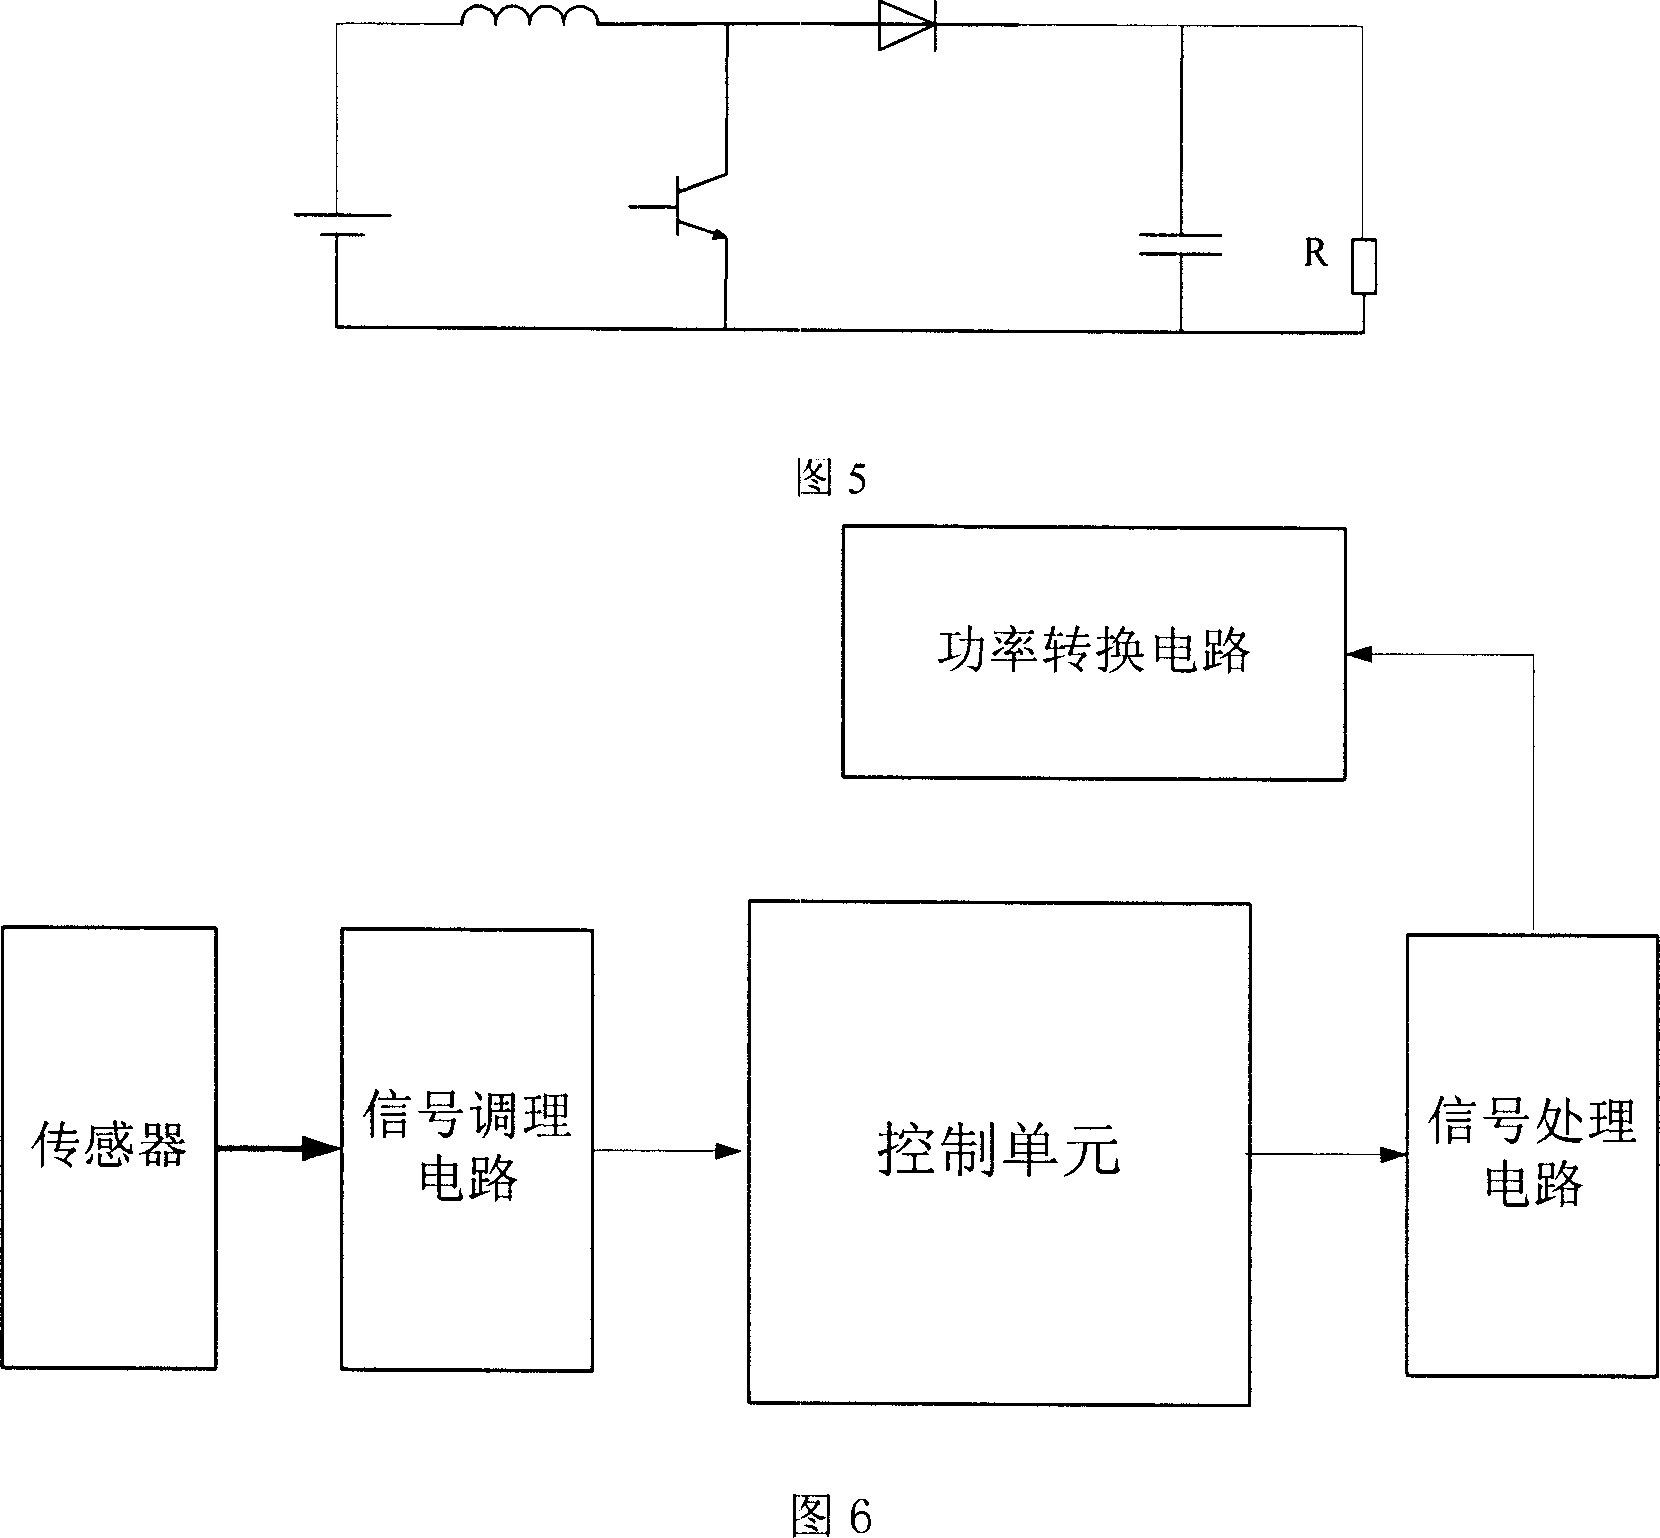 Power system of charged type hybrid power electric automobile